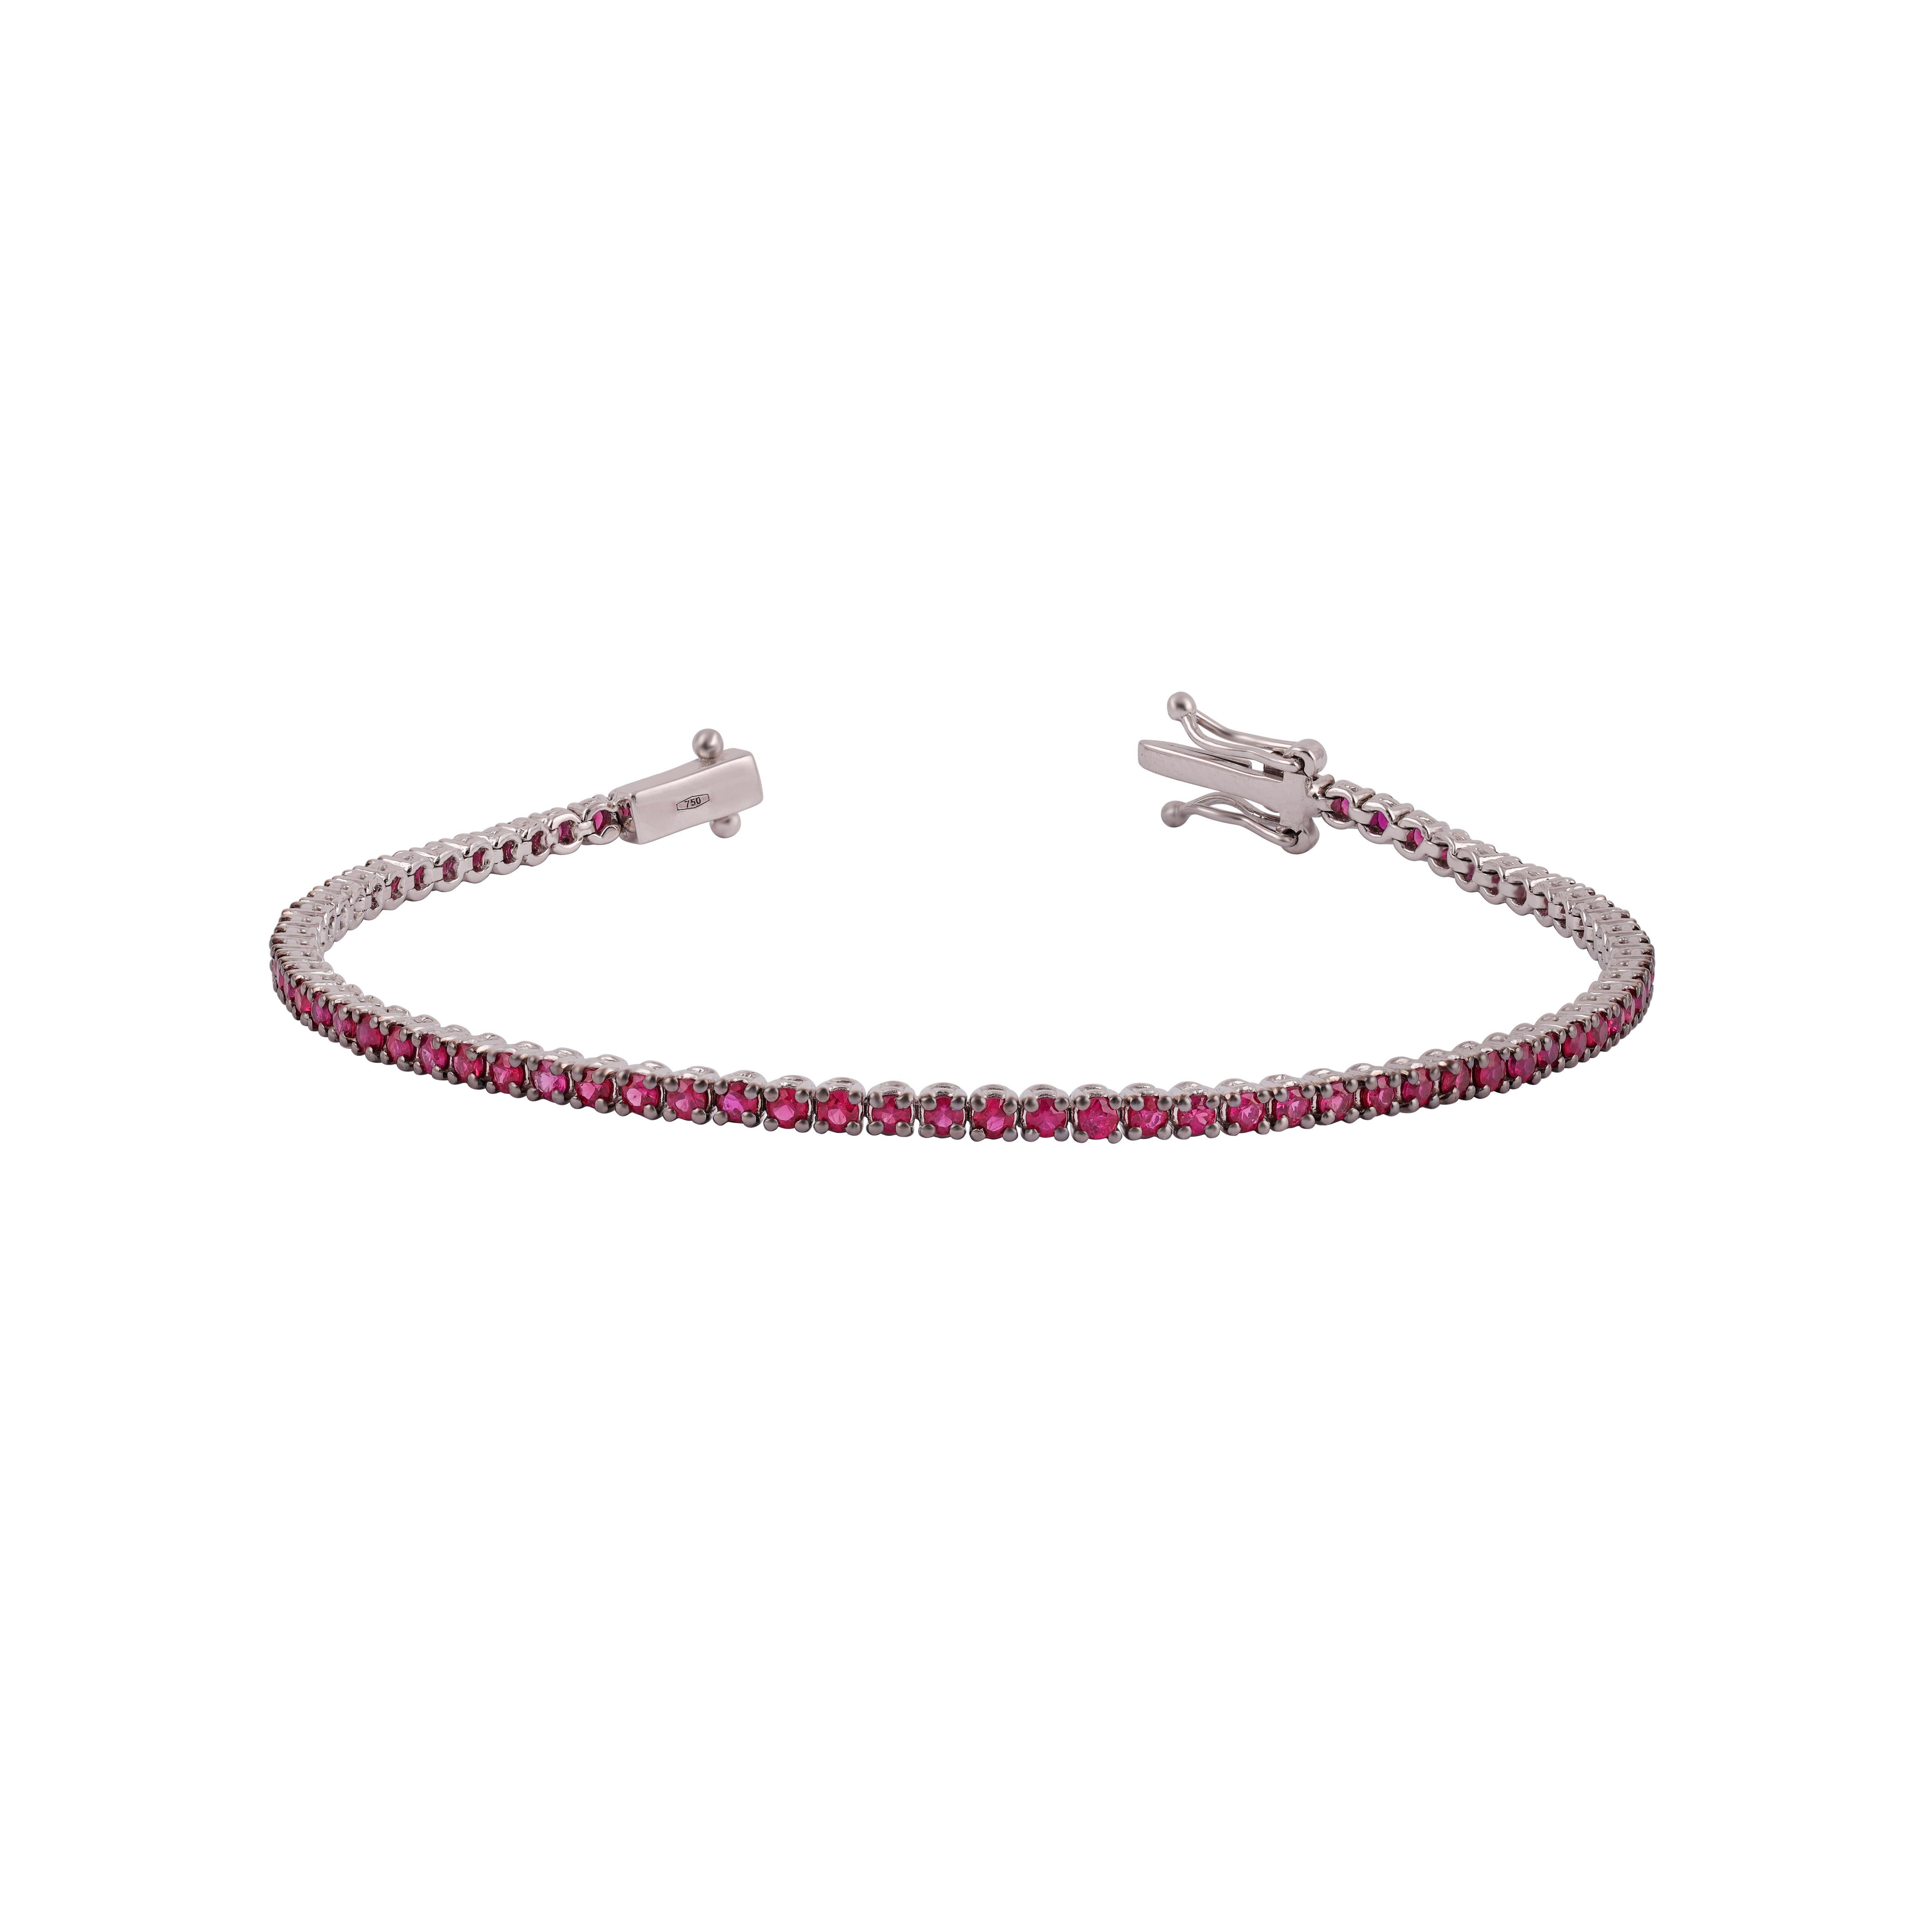 Our gold ruby tennis bracelet is finally here. We couldn’t find the perfect ruby tennis bracelet at an affordable price point, so we created it! This ruby tennis bracelet White gold is not only sleek and feminine but also has an affordable price tag